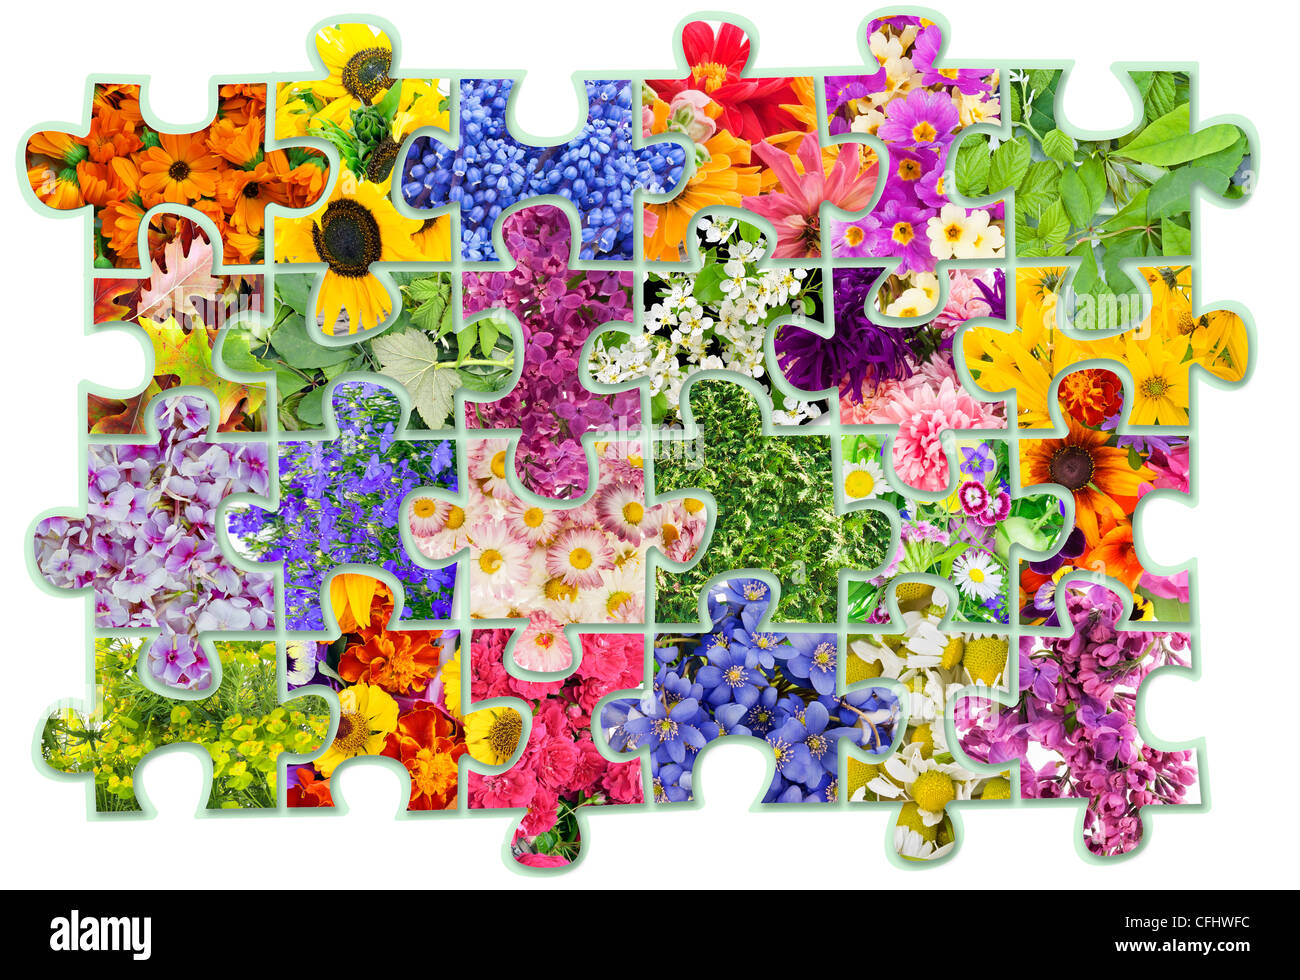 abstract collage - floral flowers plants puzzles concept background. Contains patches Stock Photo